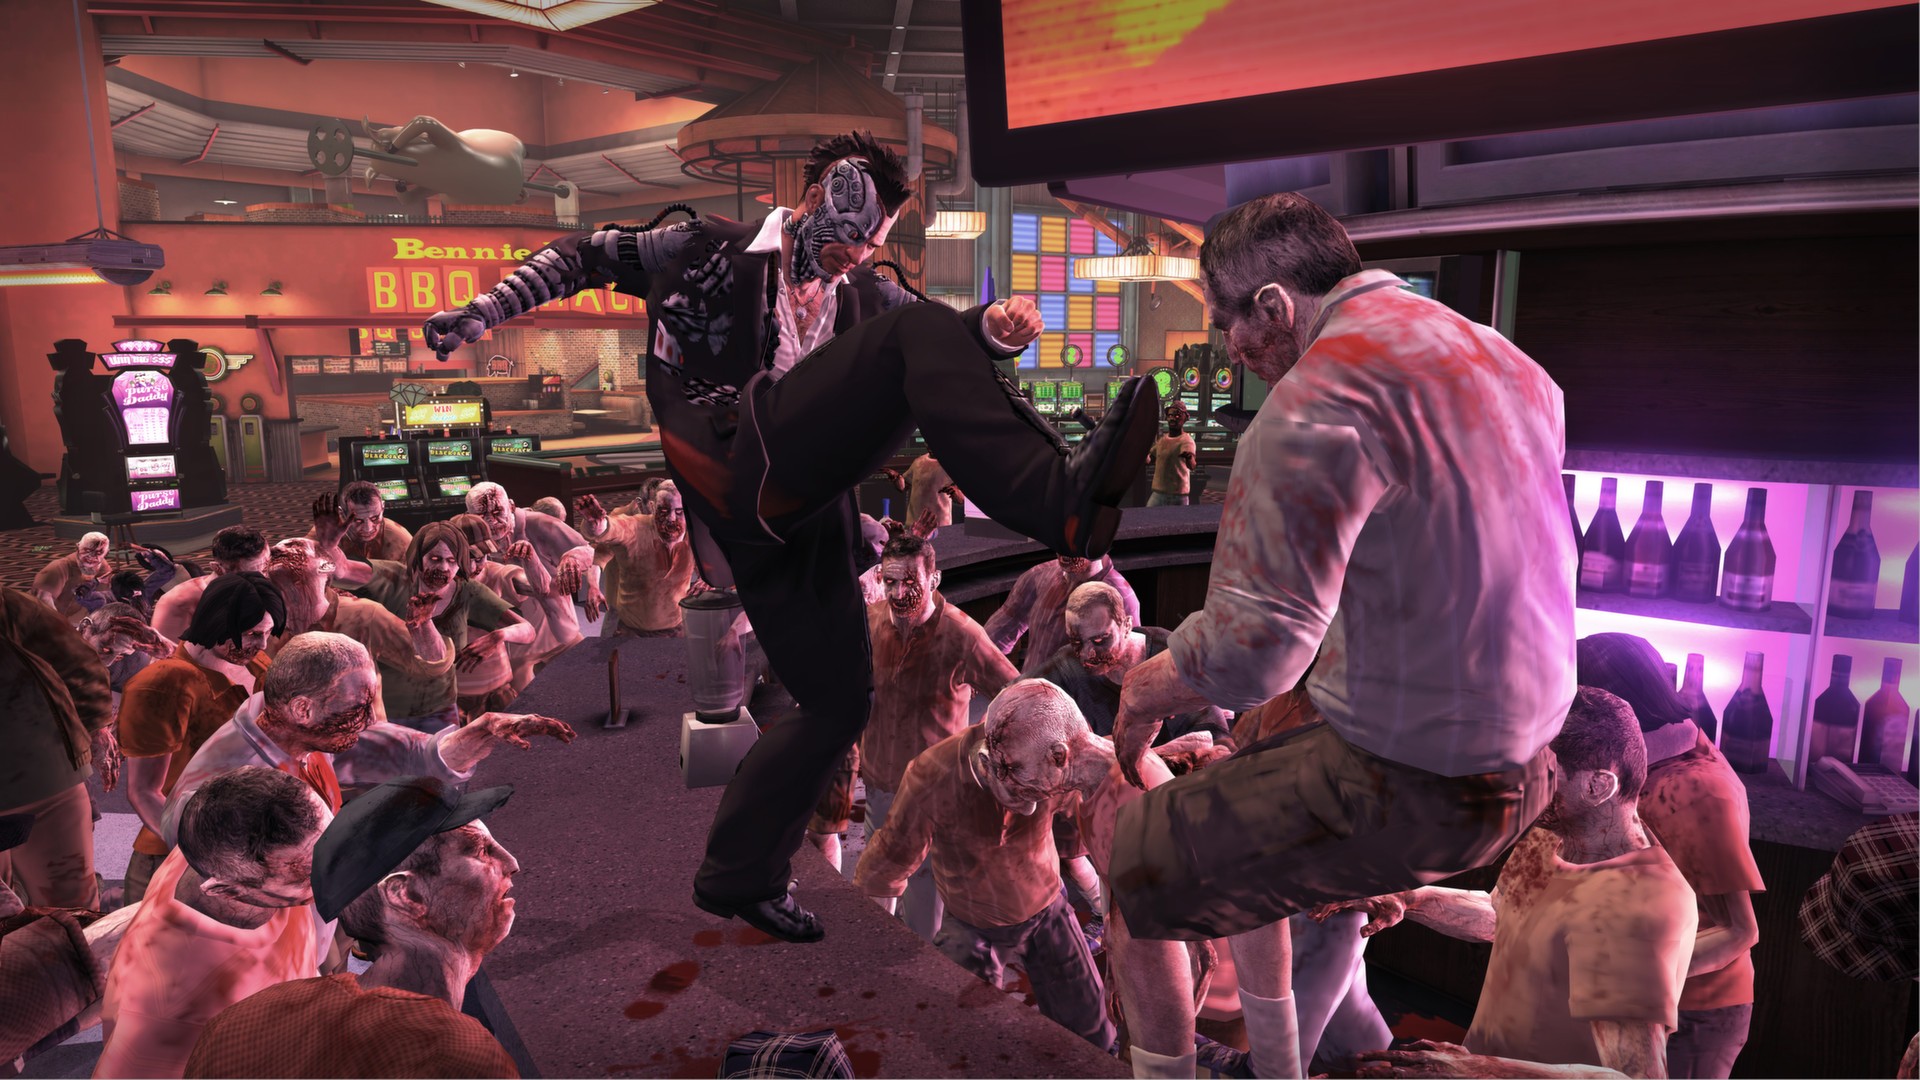 Save 70% on DEAD RISING (5,99€) : r/steamdeals